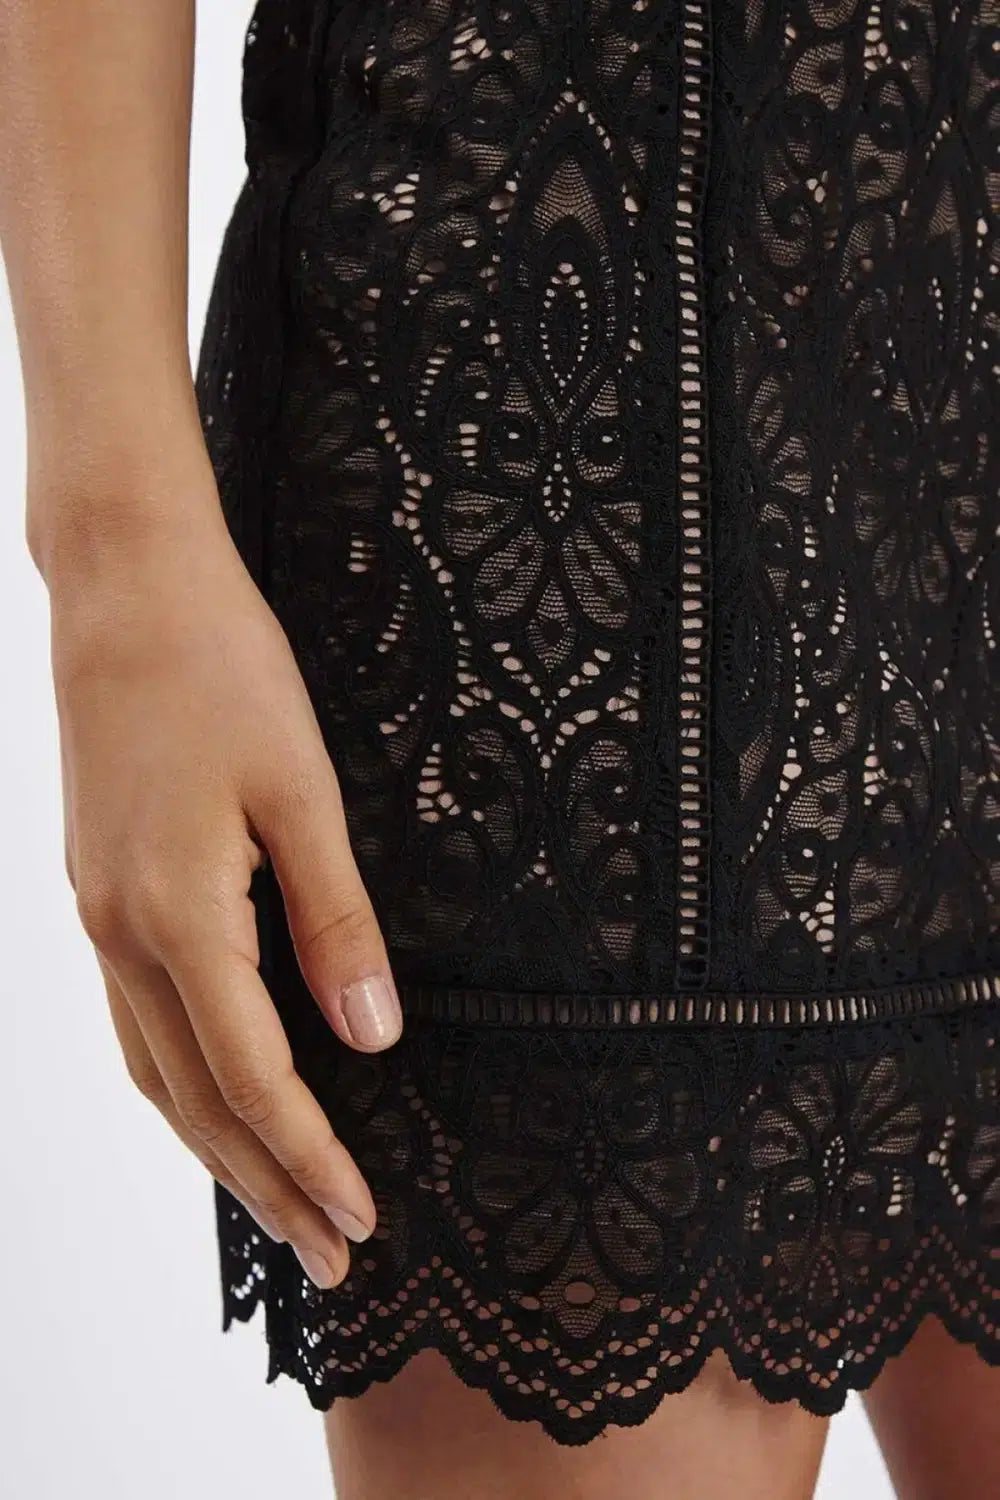 Topshop Lace Strappy Plunge Dress